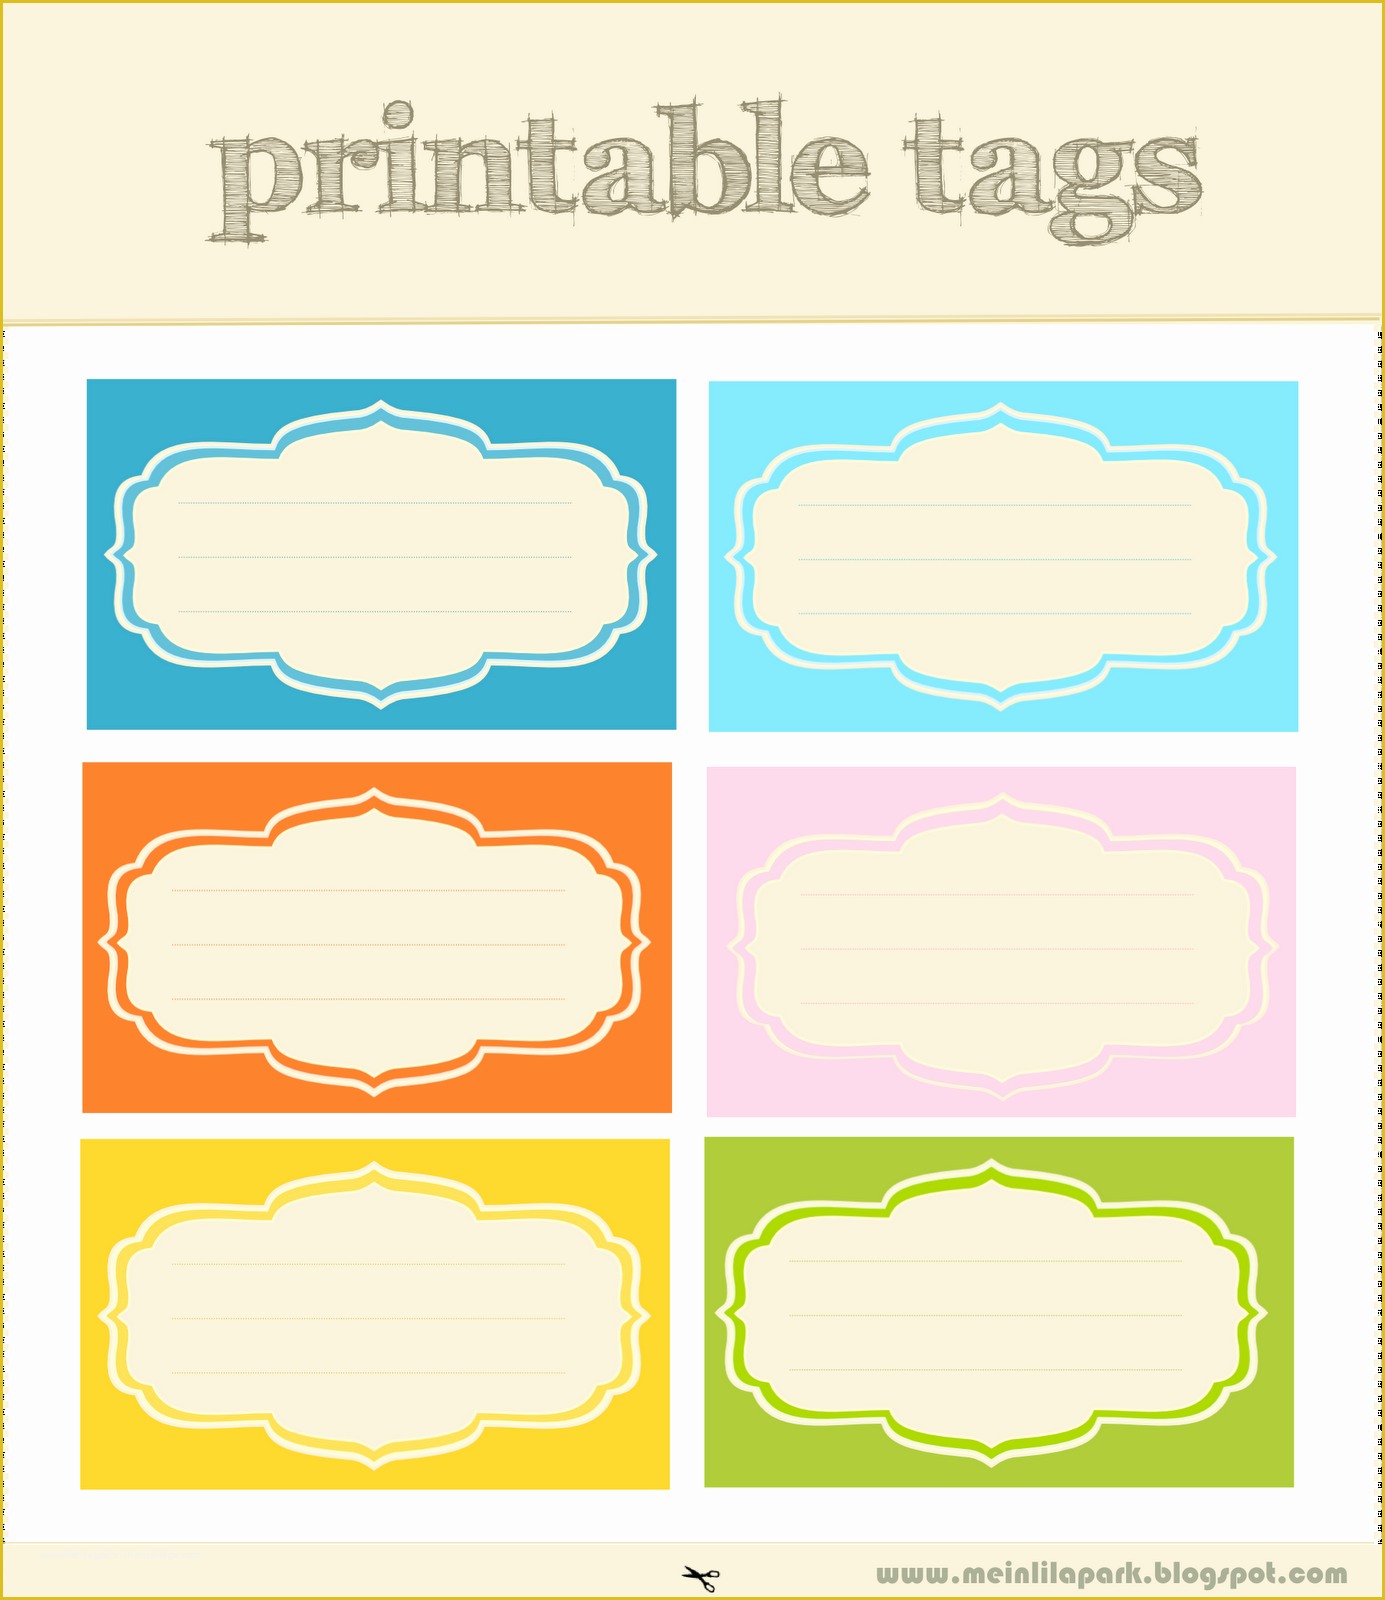 Name Tag Template Free Printable Of Free Printable Tags and Labels Love Rge Designs and